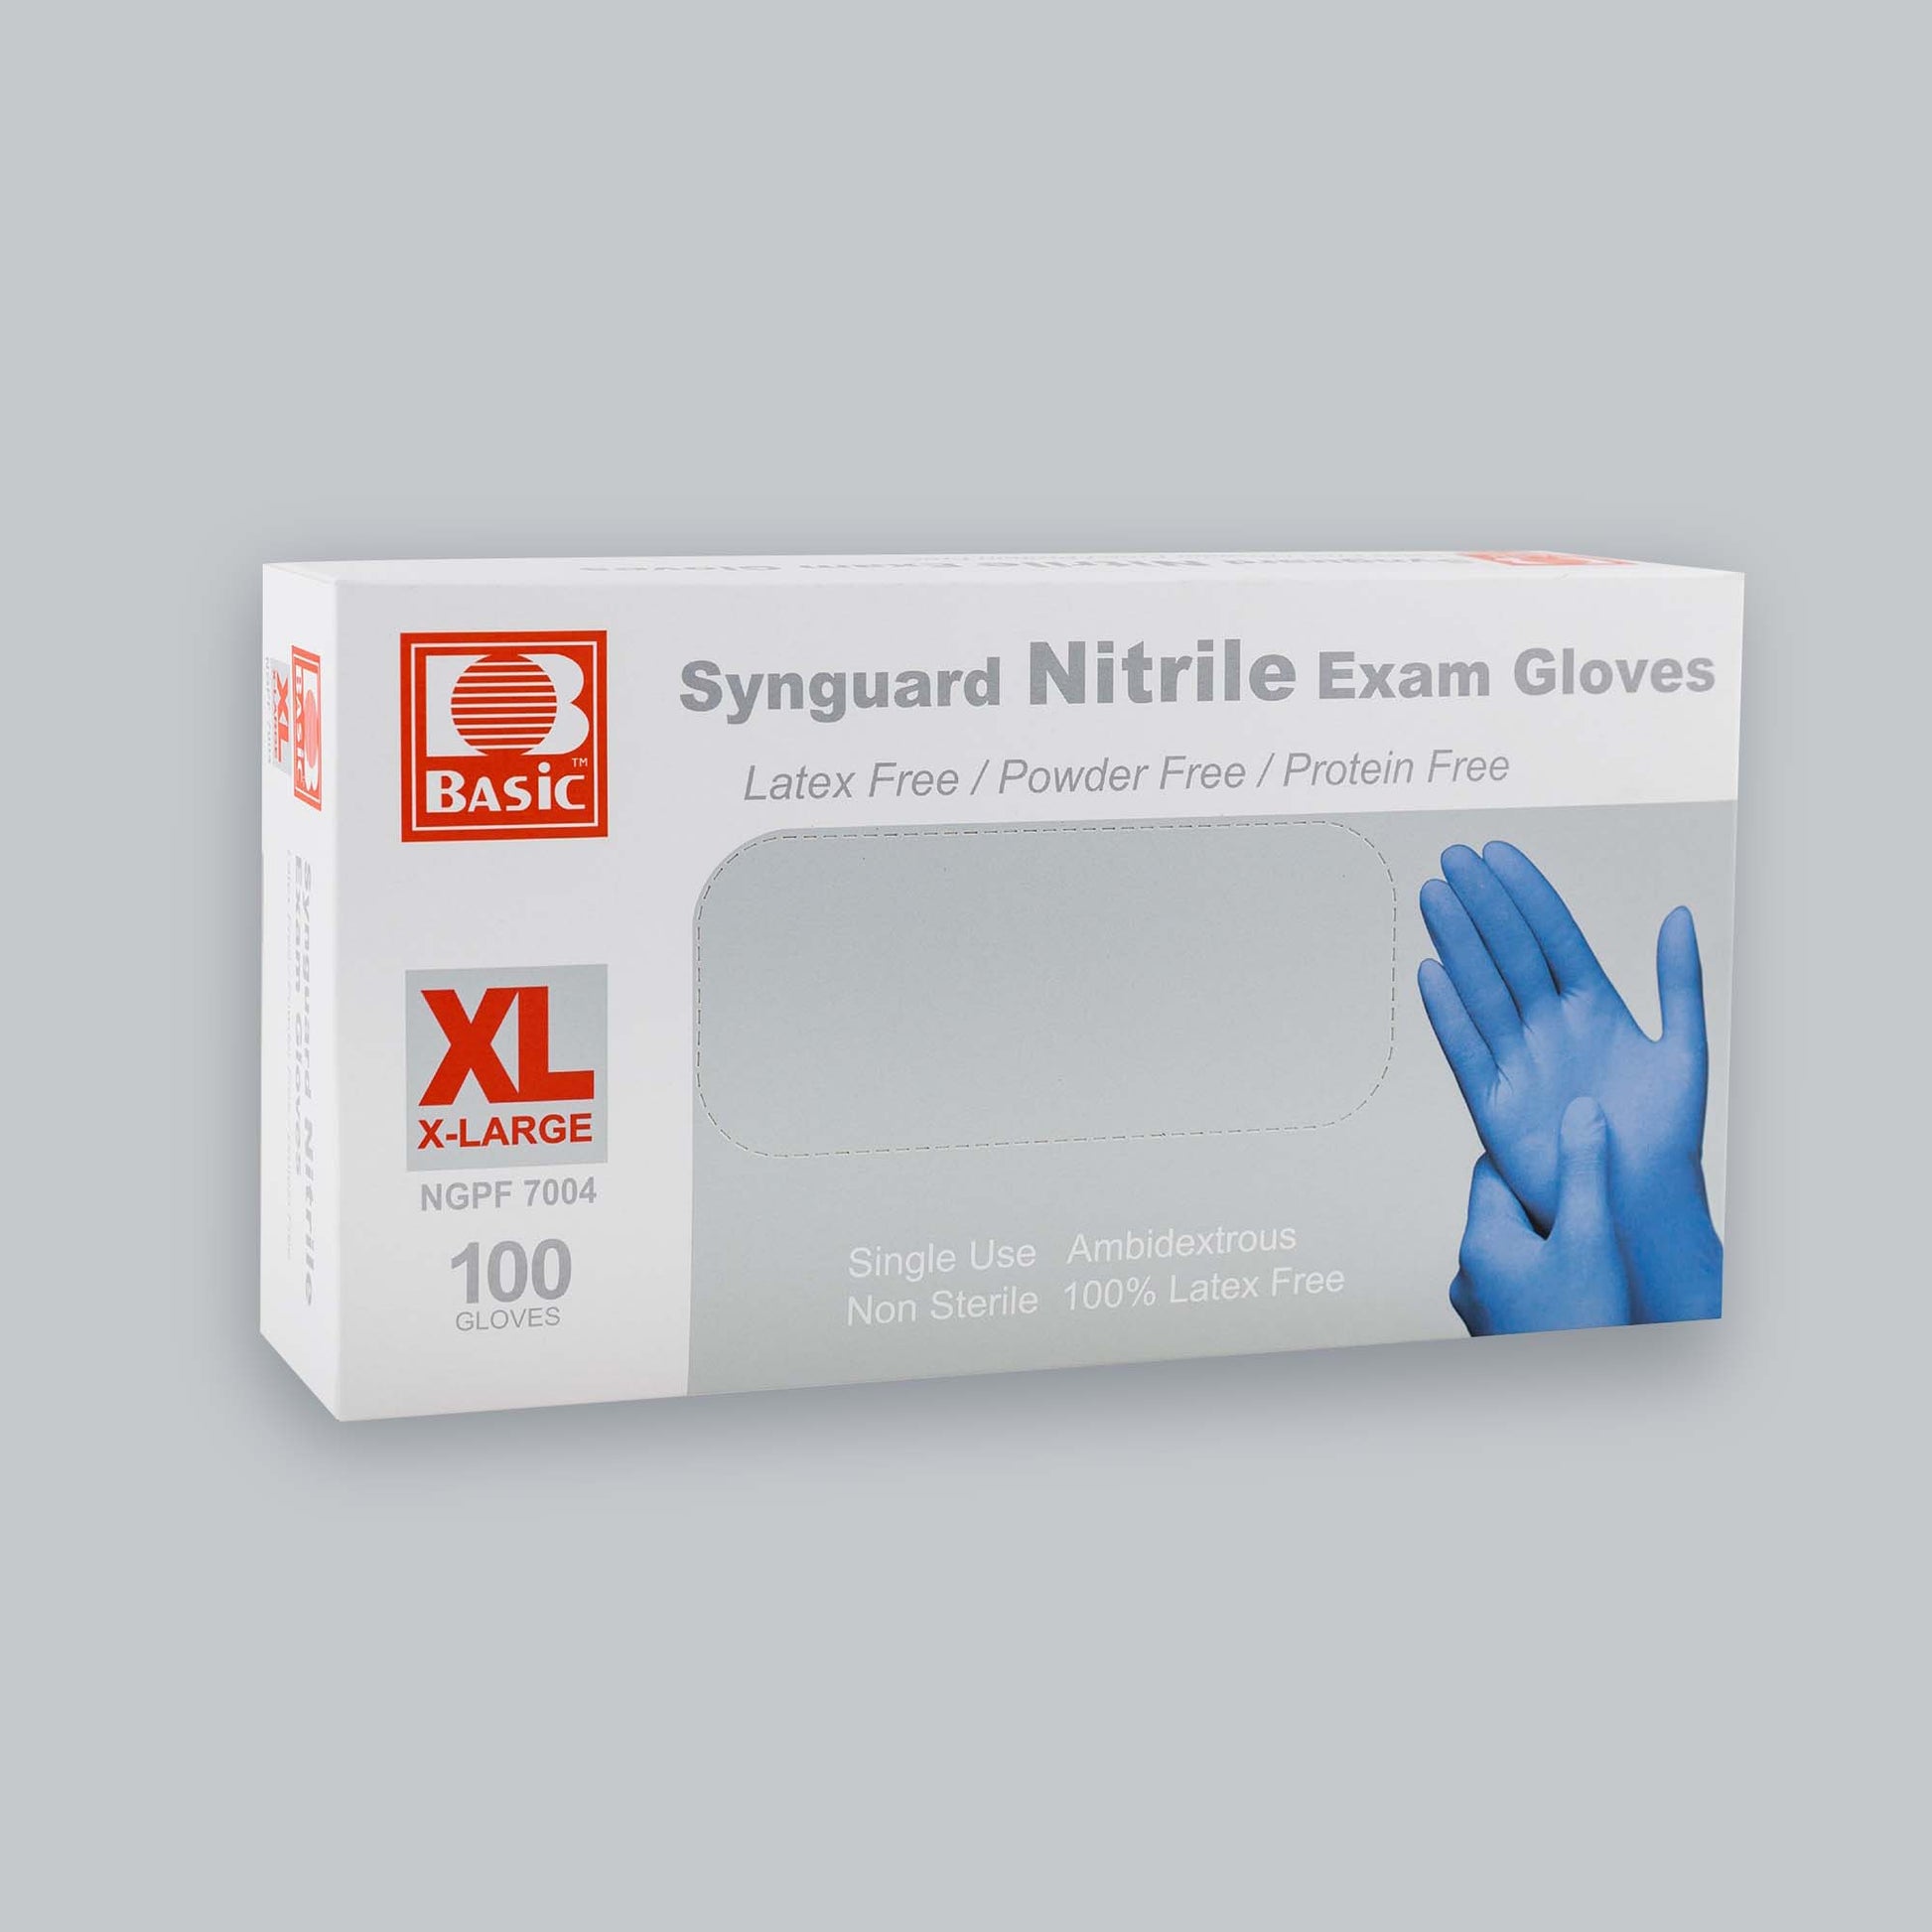 White box of blue Synguard nitrile gloves in size X Large